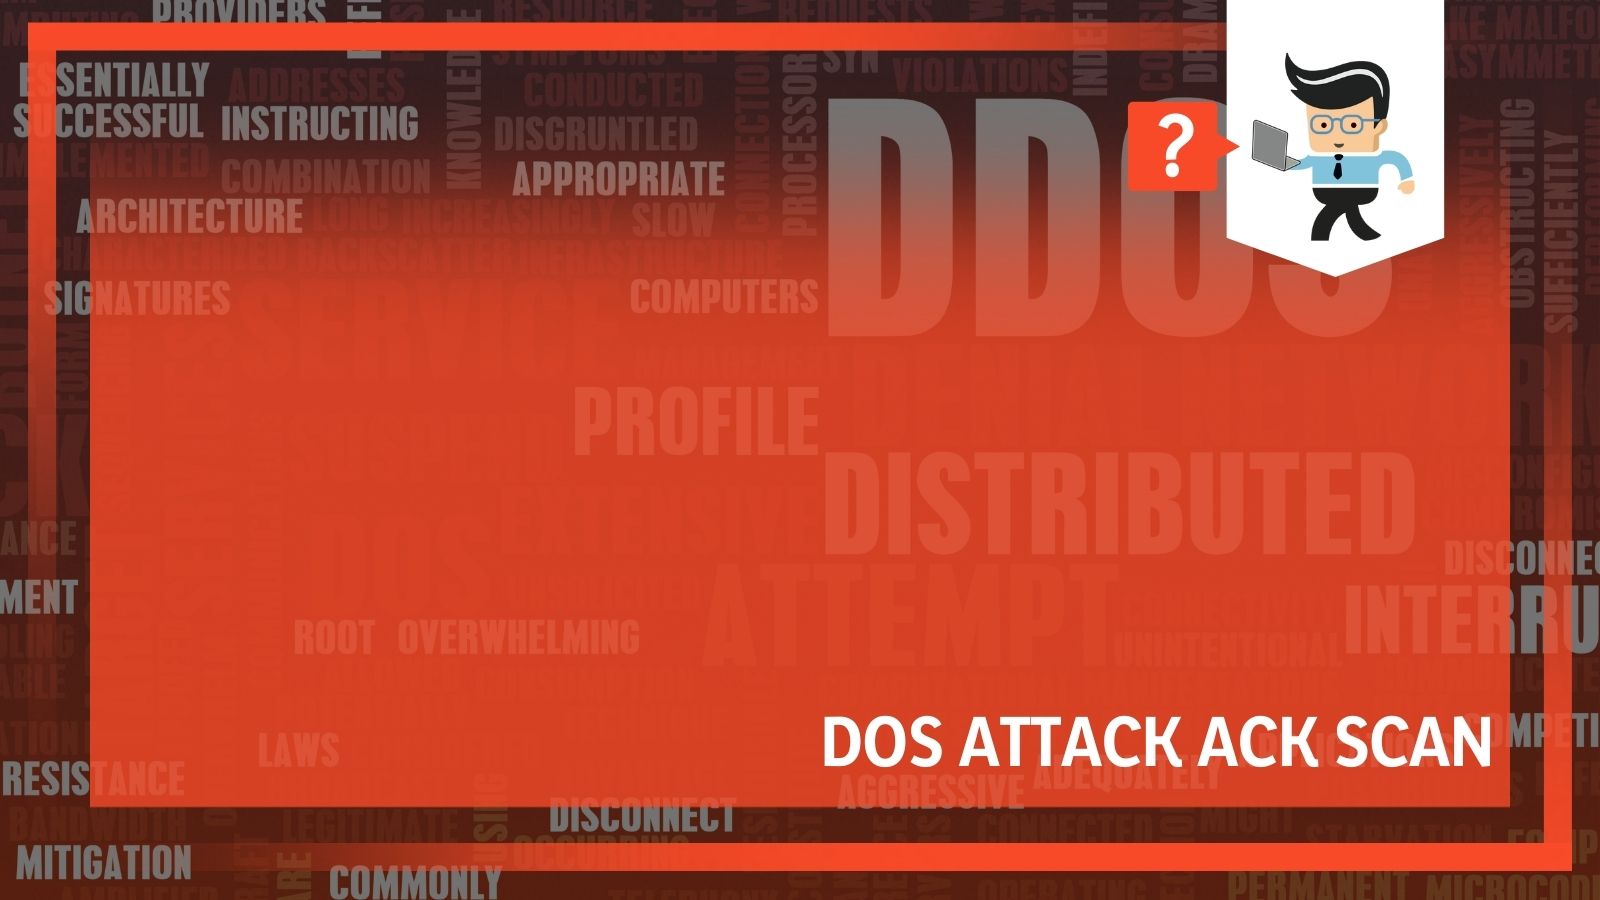 Dos Attack Ack Scan